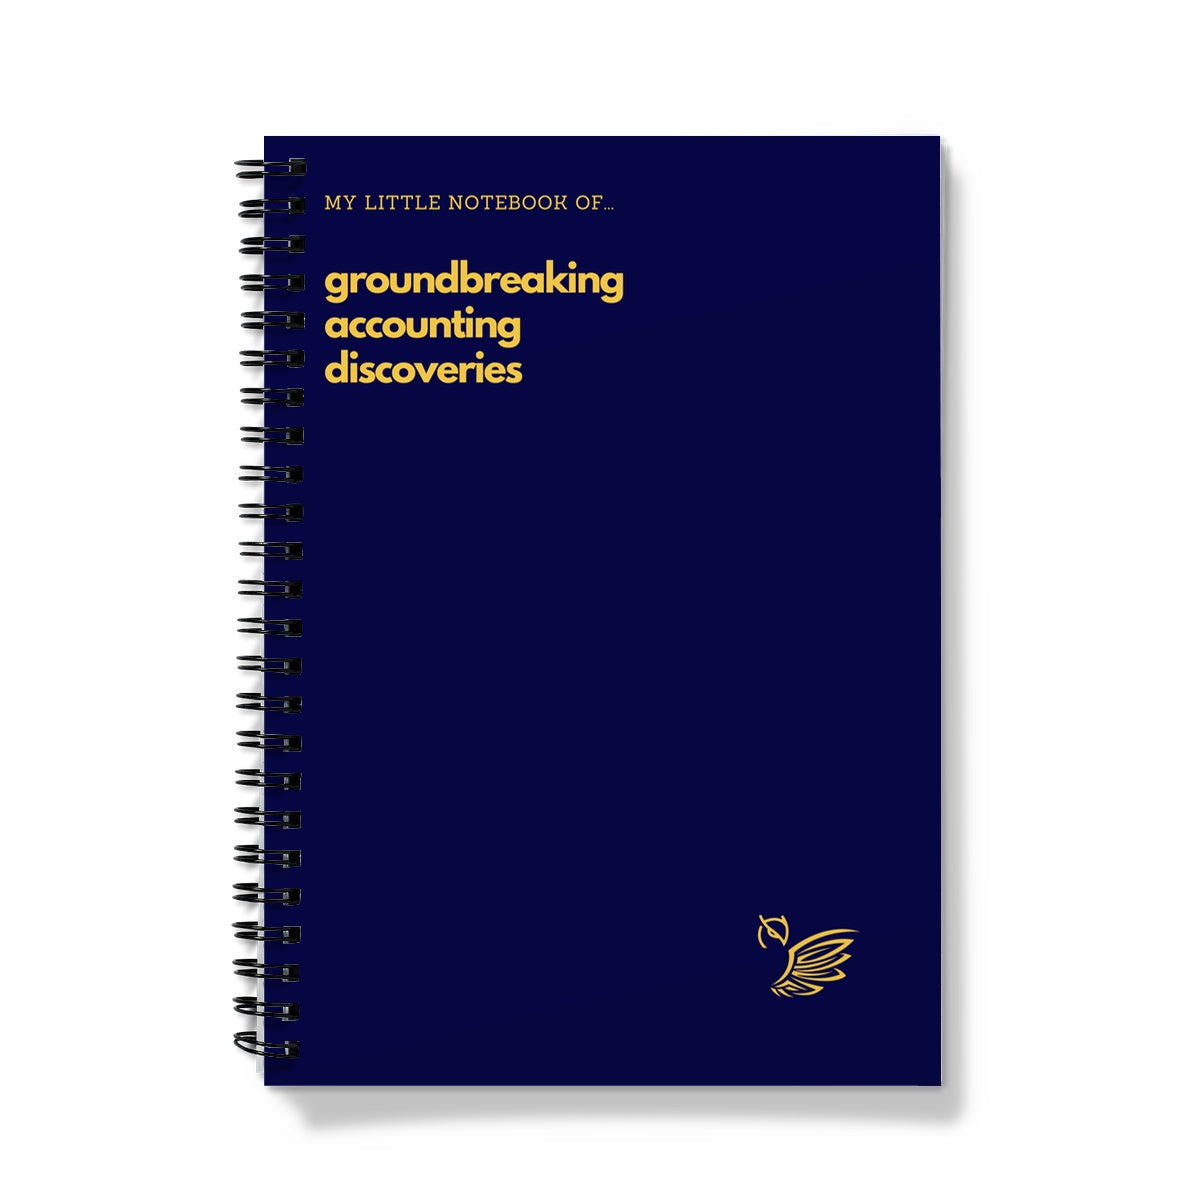 My Little Notebook Of... Groundbreaking Accounting Discoveries Notebook